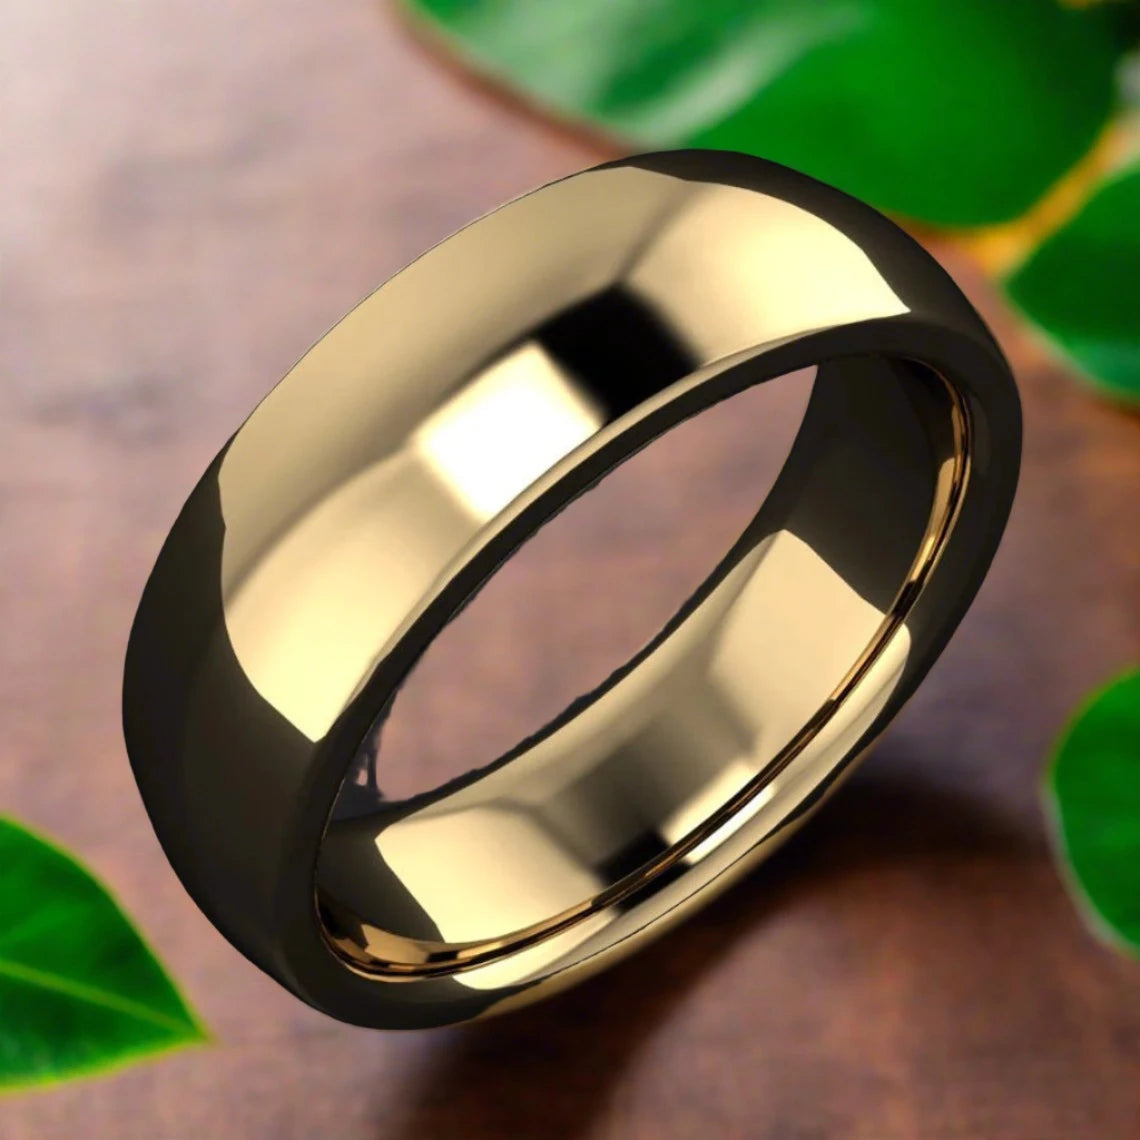 aragorn ring - 14k gold men's wedding band, Lord of the Rings - J Hollywood Designs